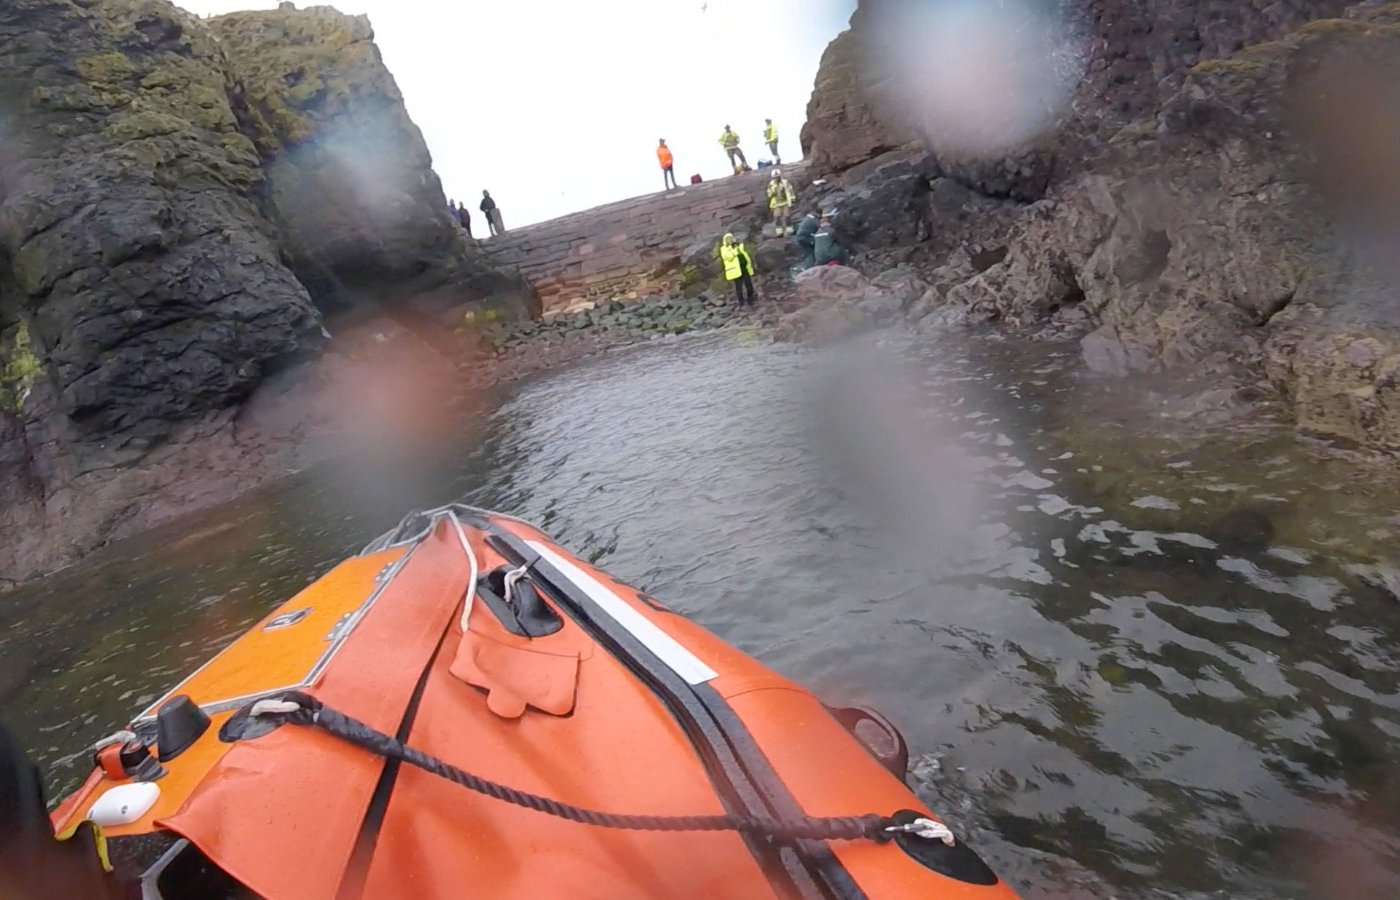 The crew provided a basket stretcher and  helped transfer the casualty to the waiting lifeboat. 